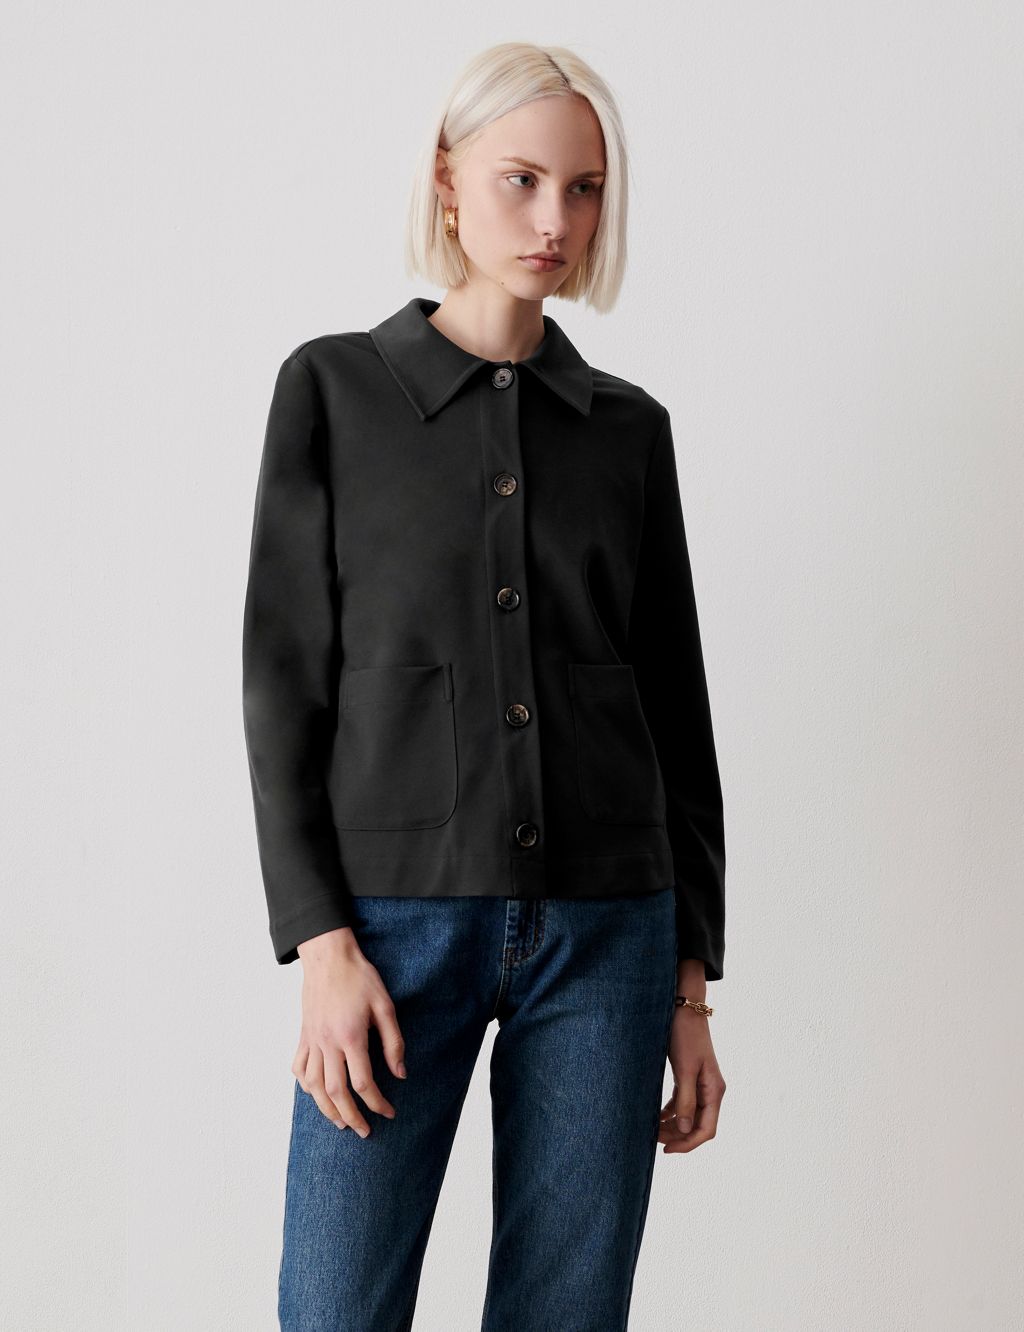 Ponte Jersey Collared Short Jacket | Finery London | M&S